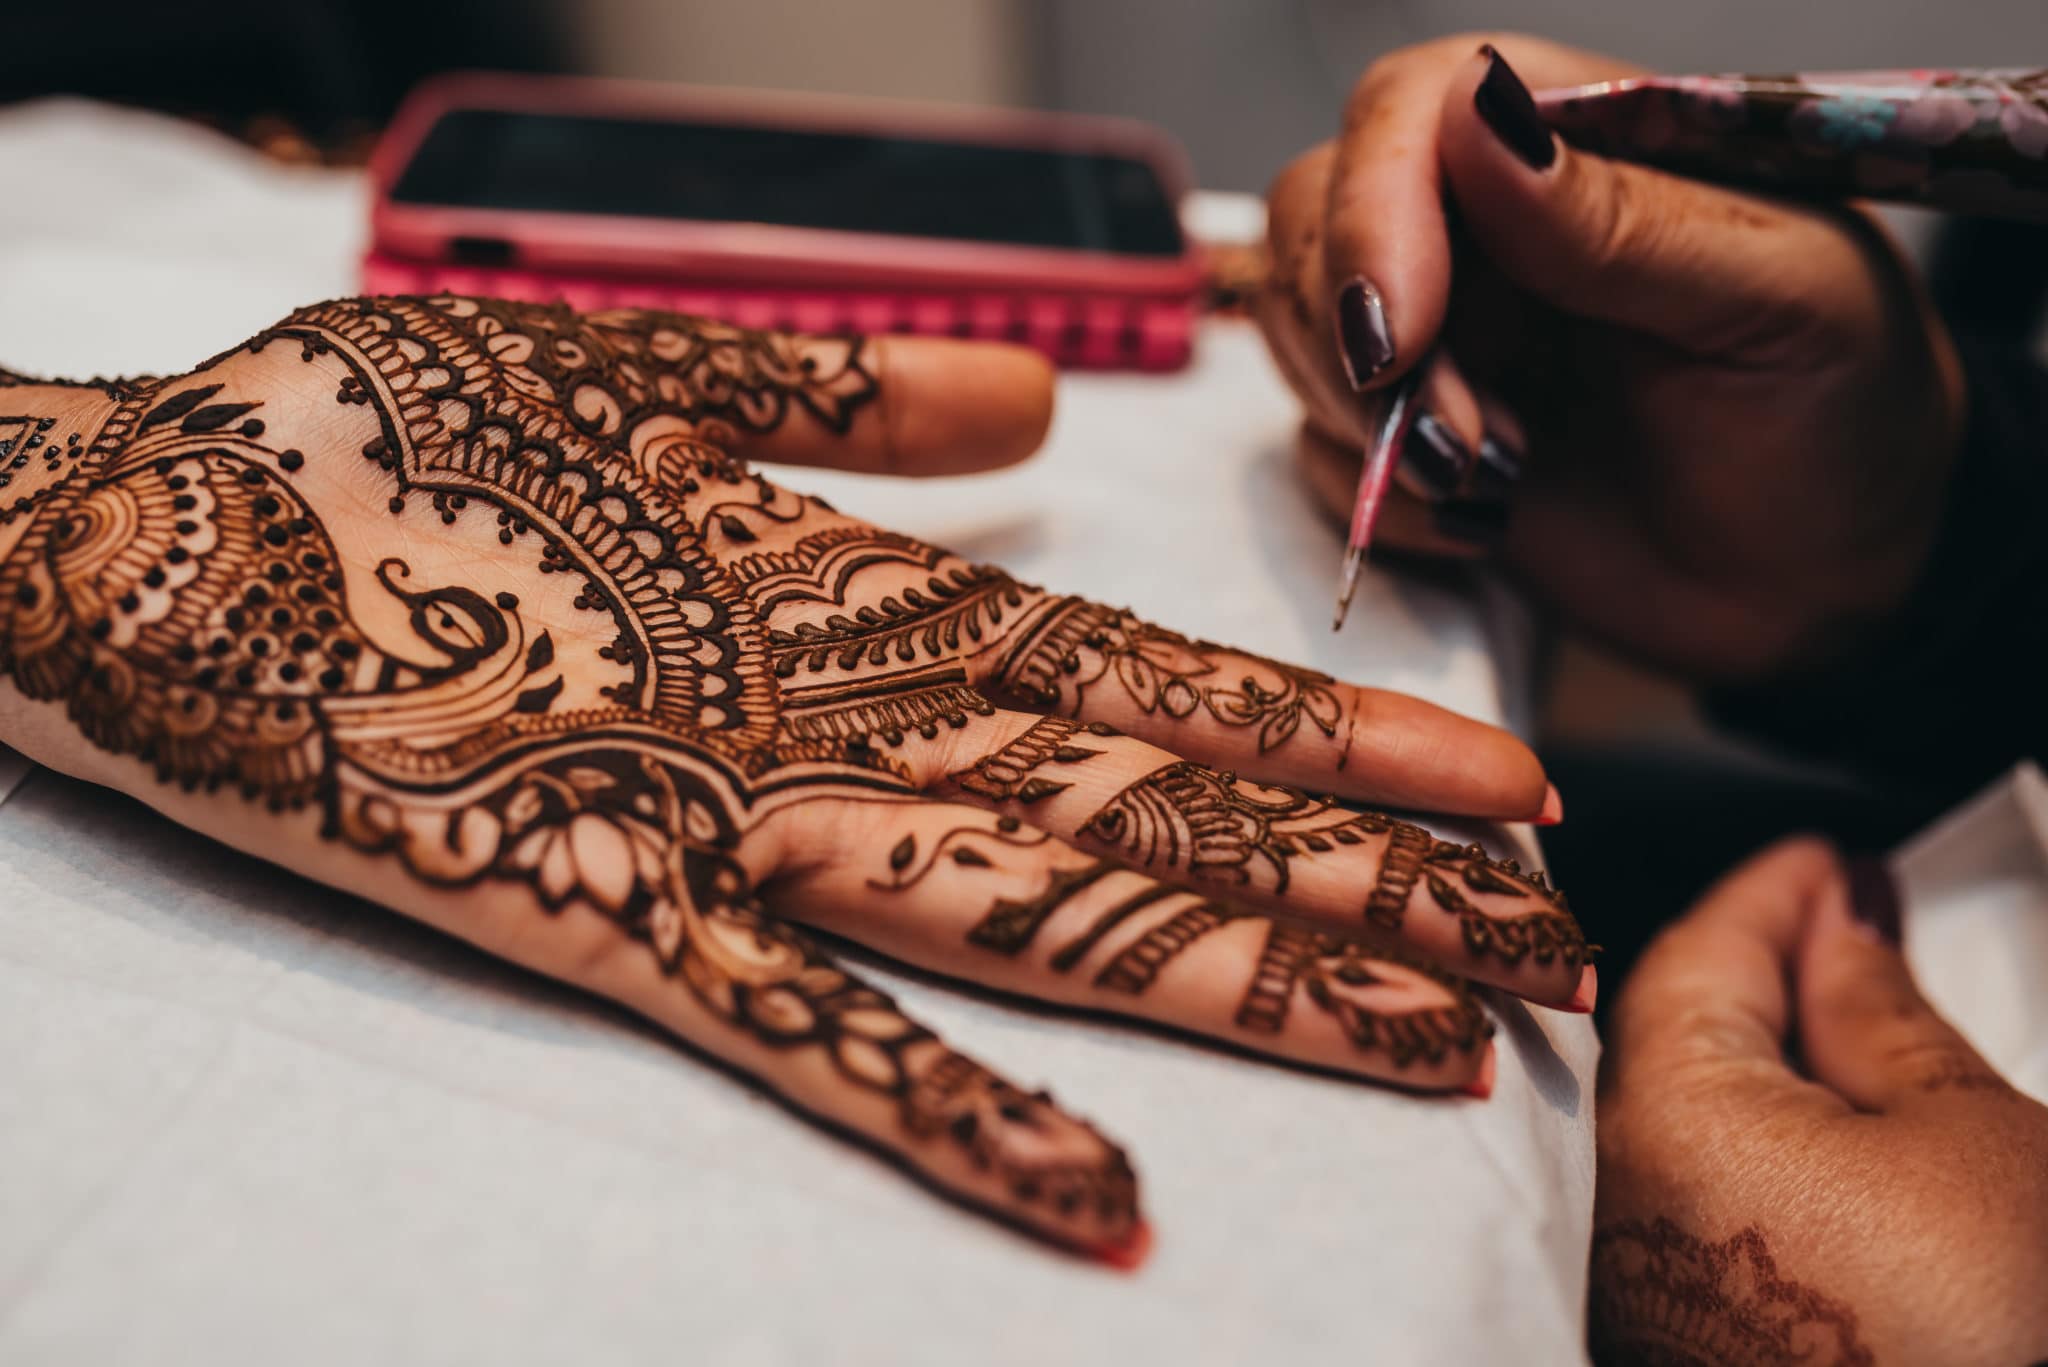 Pre-wedding Vidhi , Mehndi and Pithi ceremony in an Indian wedding ceremony, Barnet, Potters Bar London